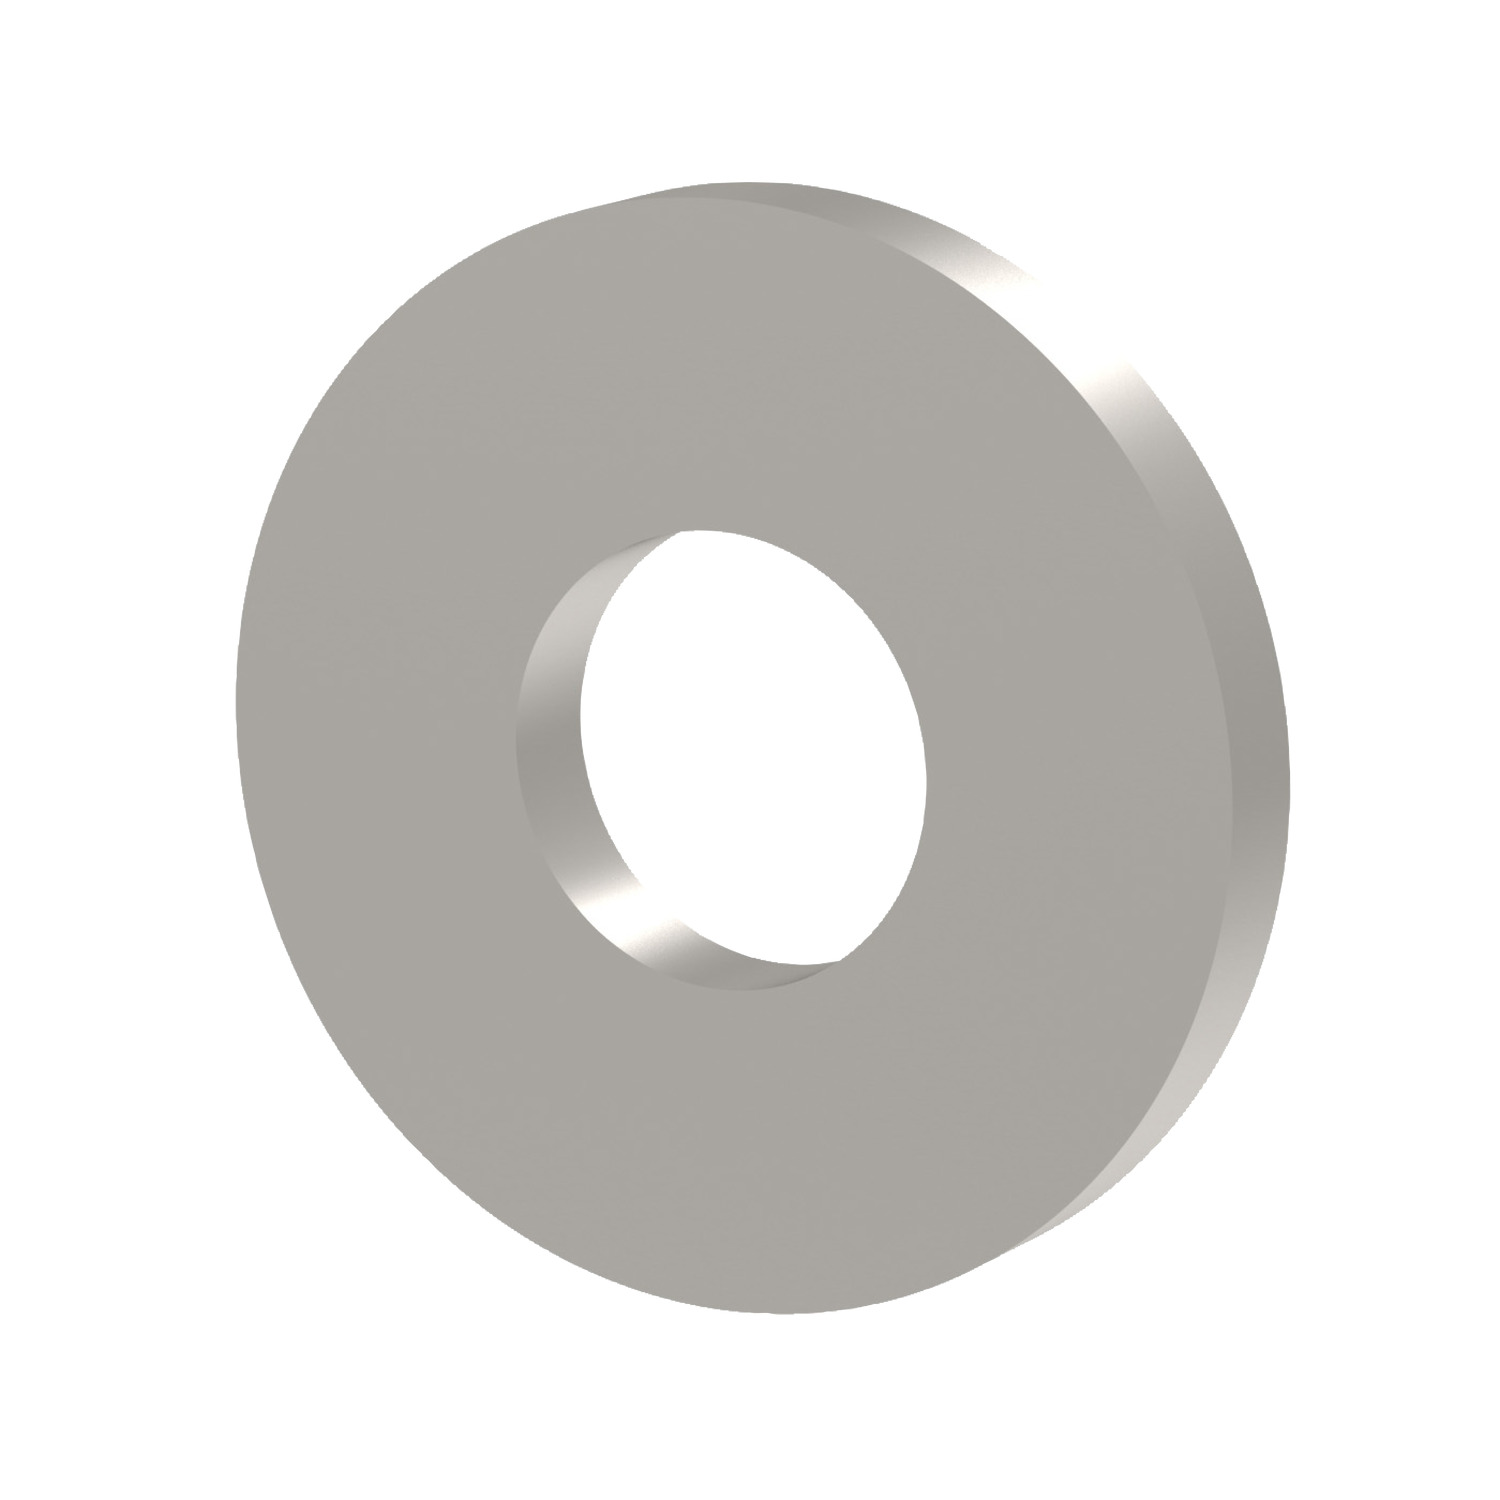 Form A Standard Form A washers available in steel, stainless steel, self-coloured steel, brass and nylon.